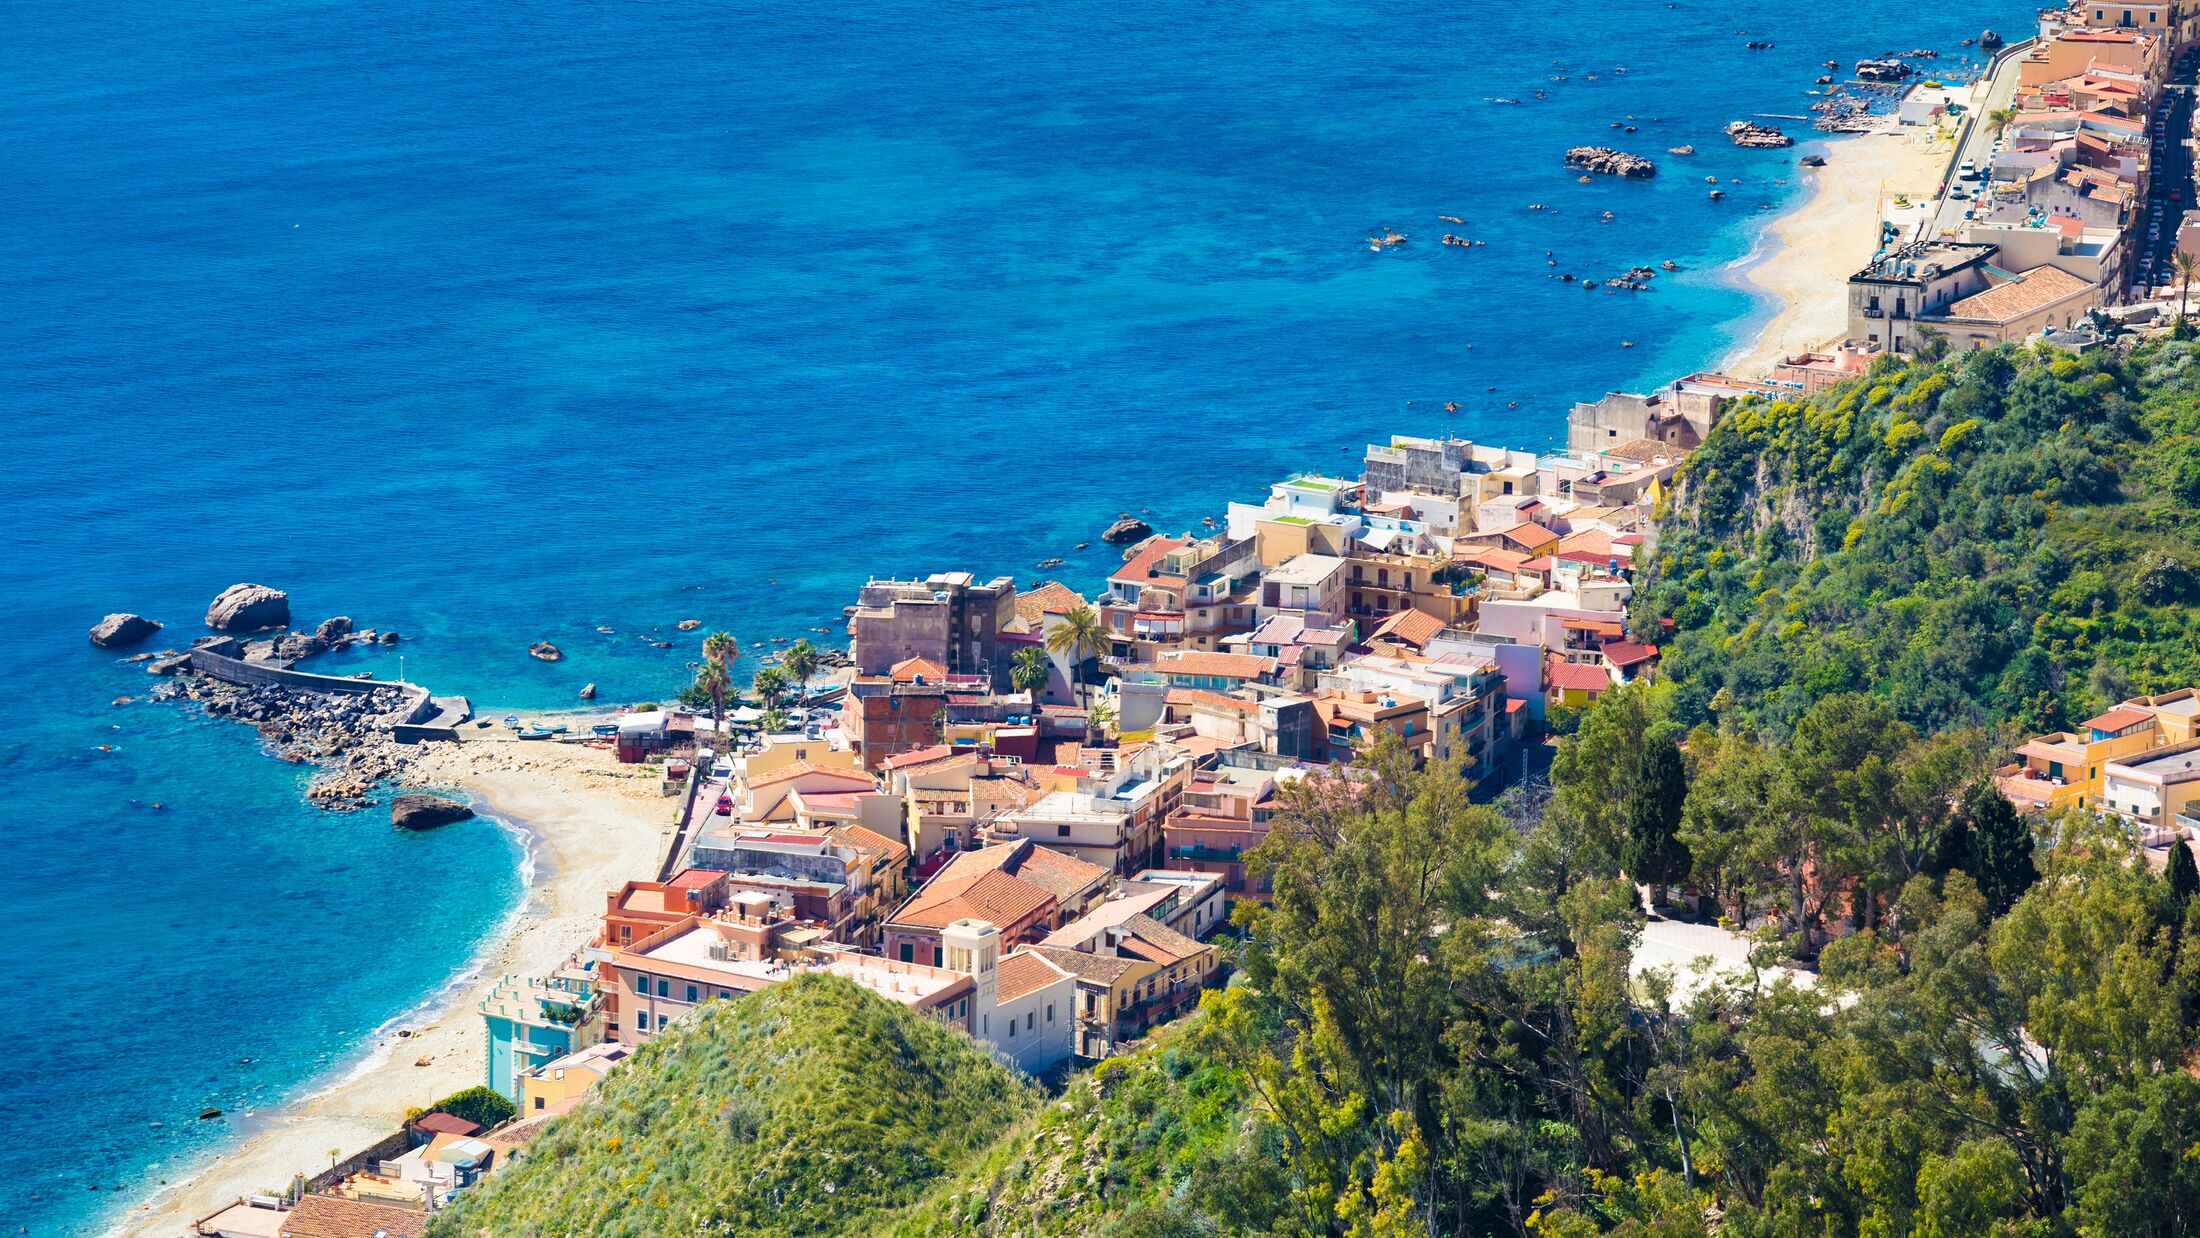 Aerial view of Giardini Naxos, comune in Messina on Sicily Island, Italy. It is situated on coast of Ionian Sea between Cape Taormina and Cape Schiso.